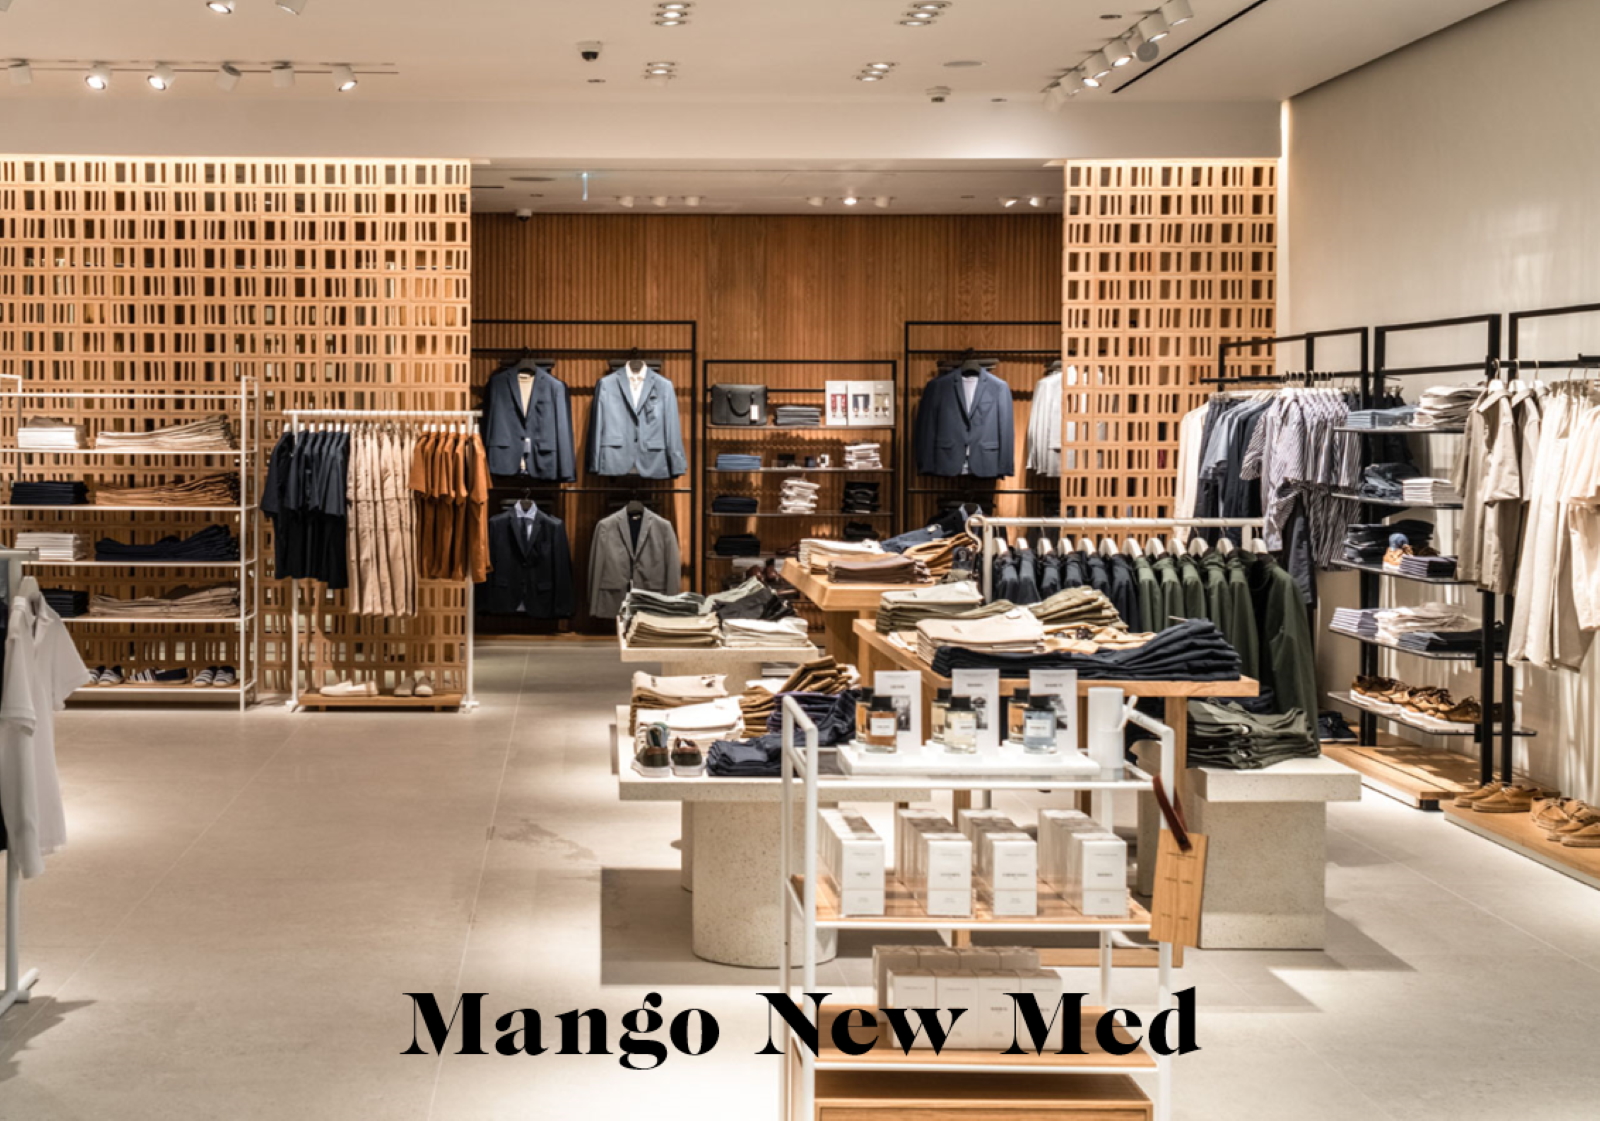 Mango new med retail tour missions mmm 0